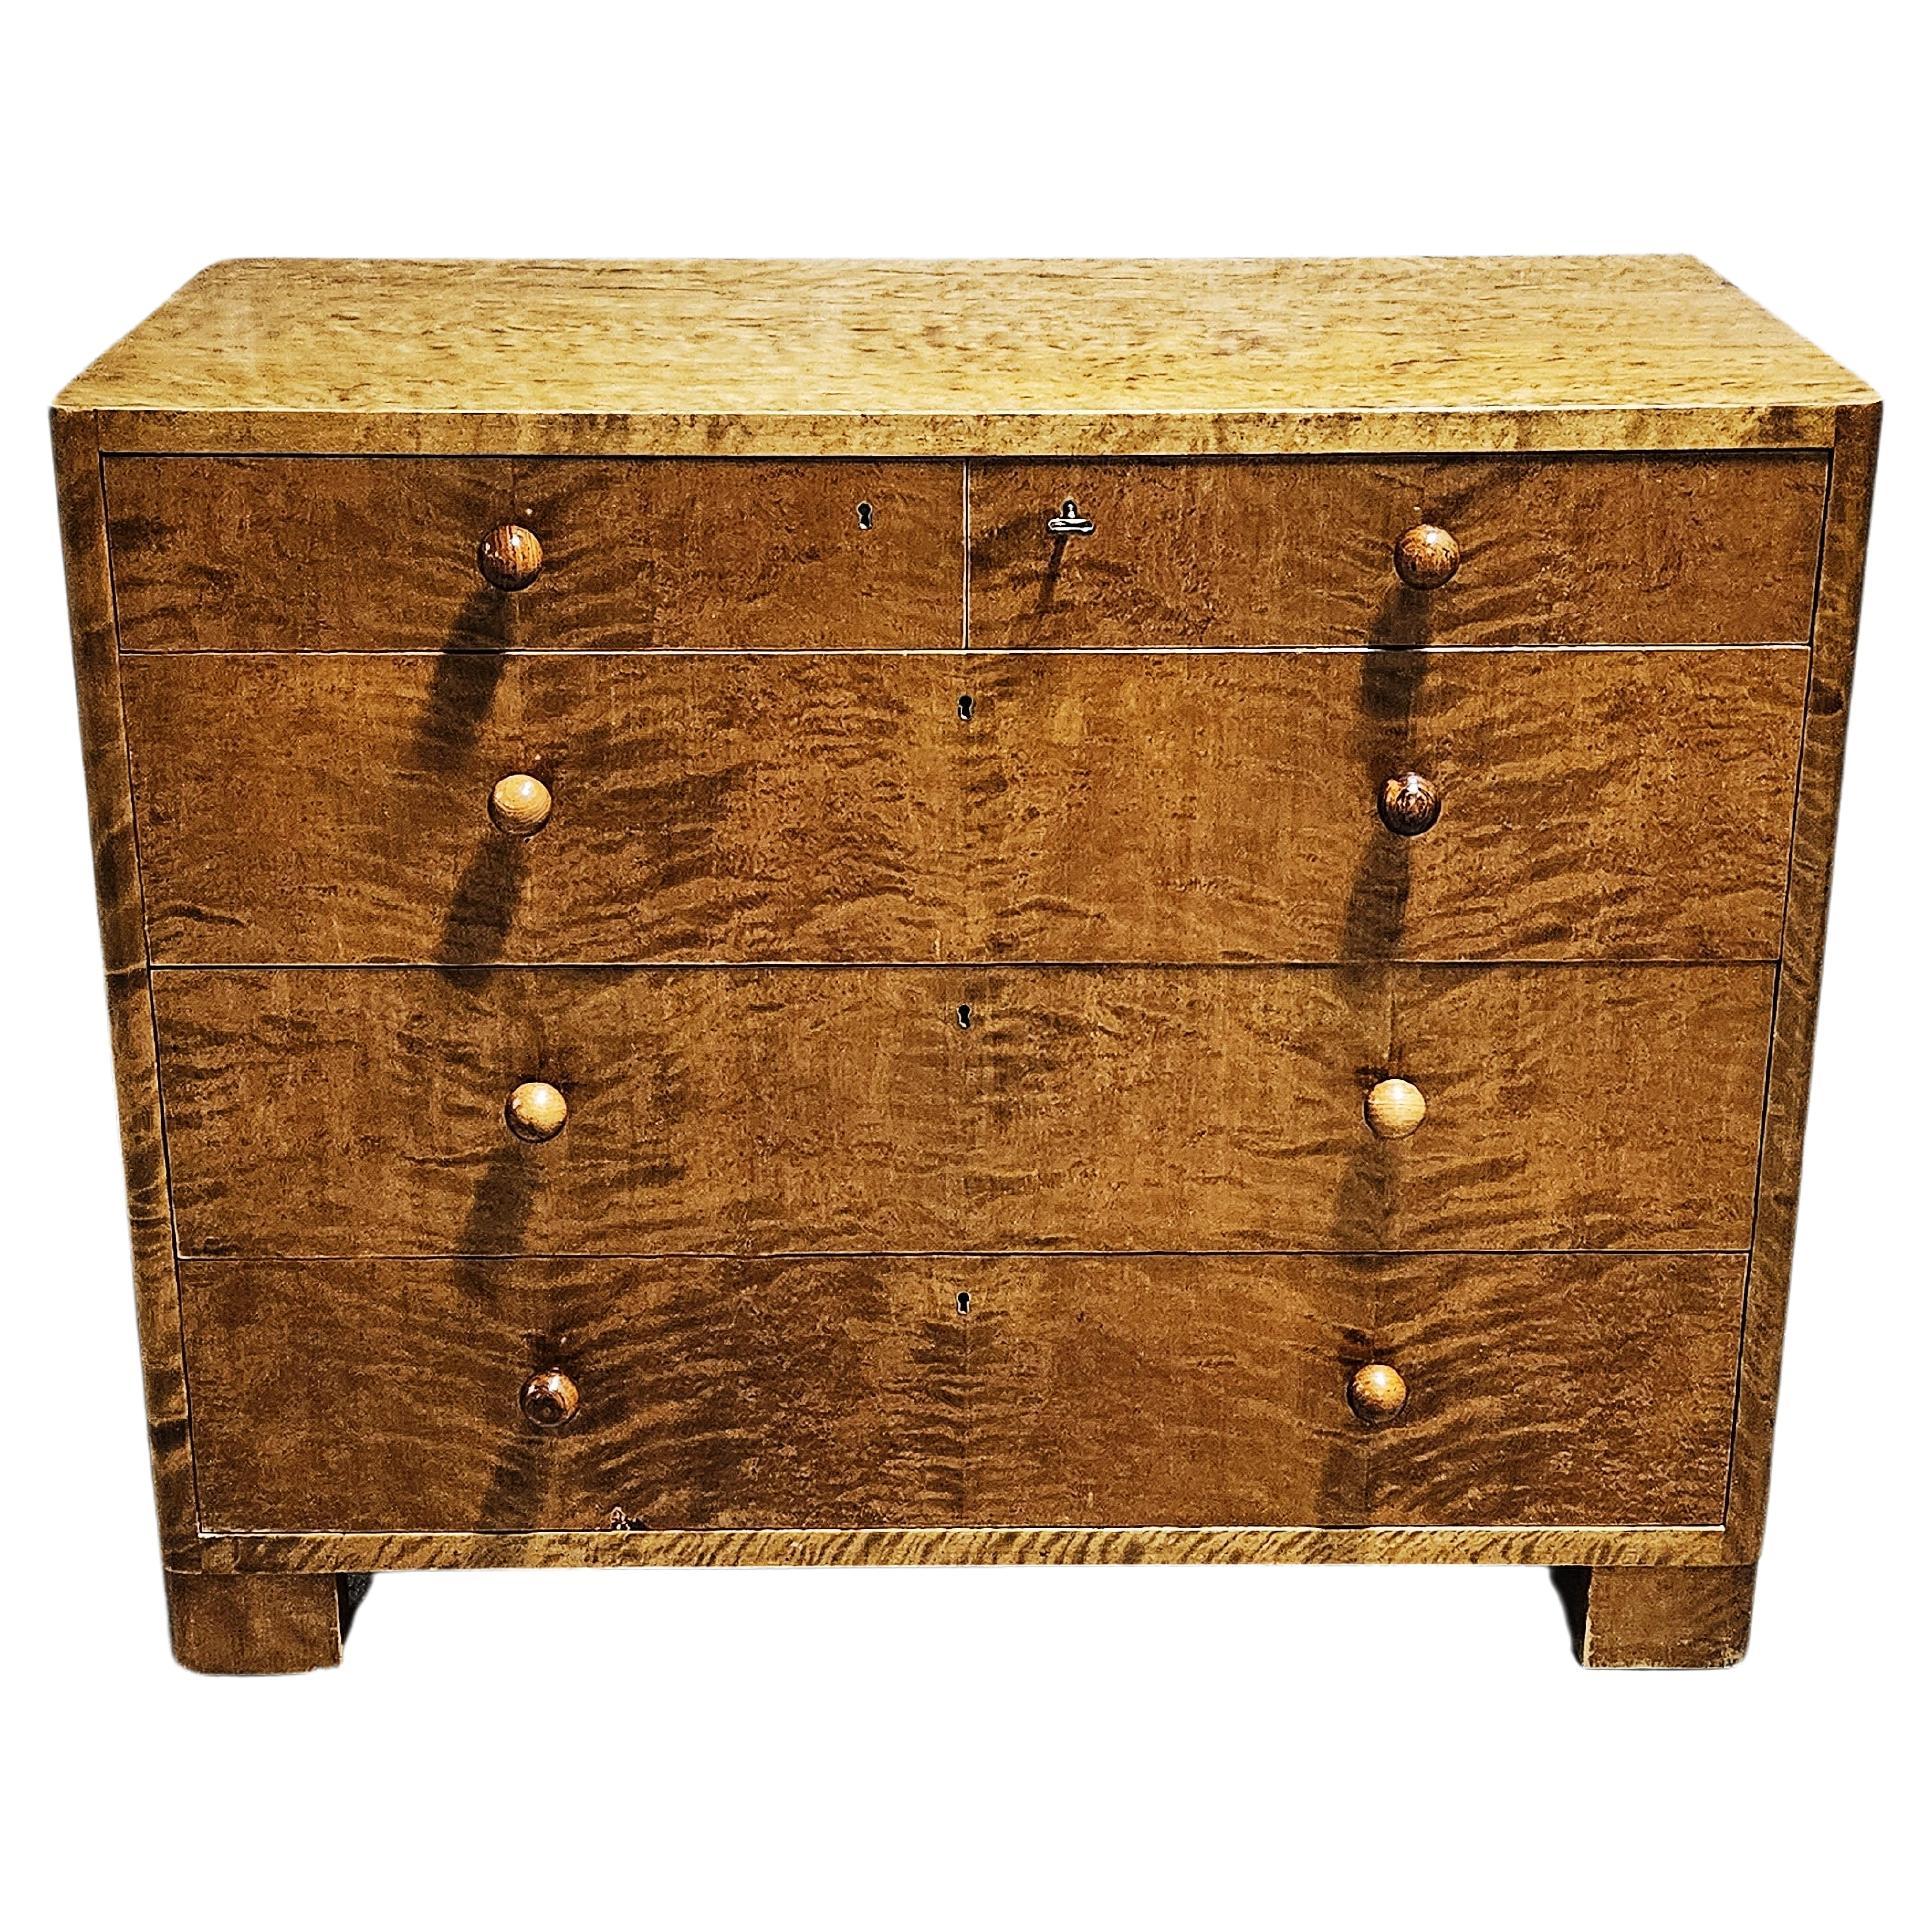 Axel Larsson functionalist chest of drawers, Bodafors, Sweden, 1930s